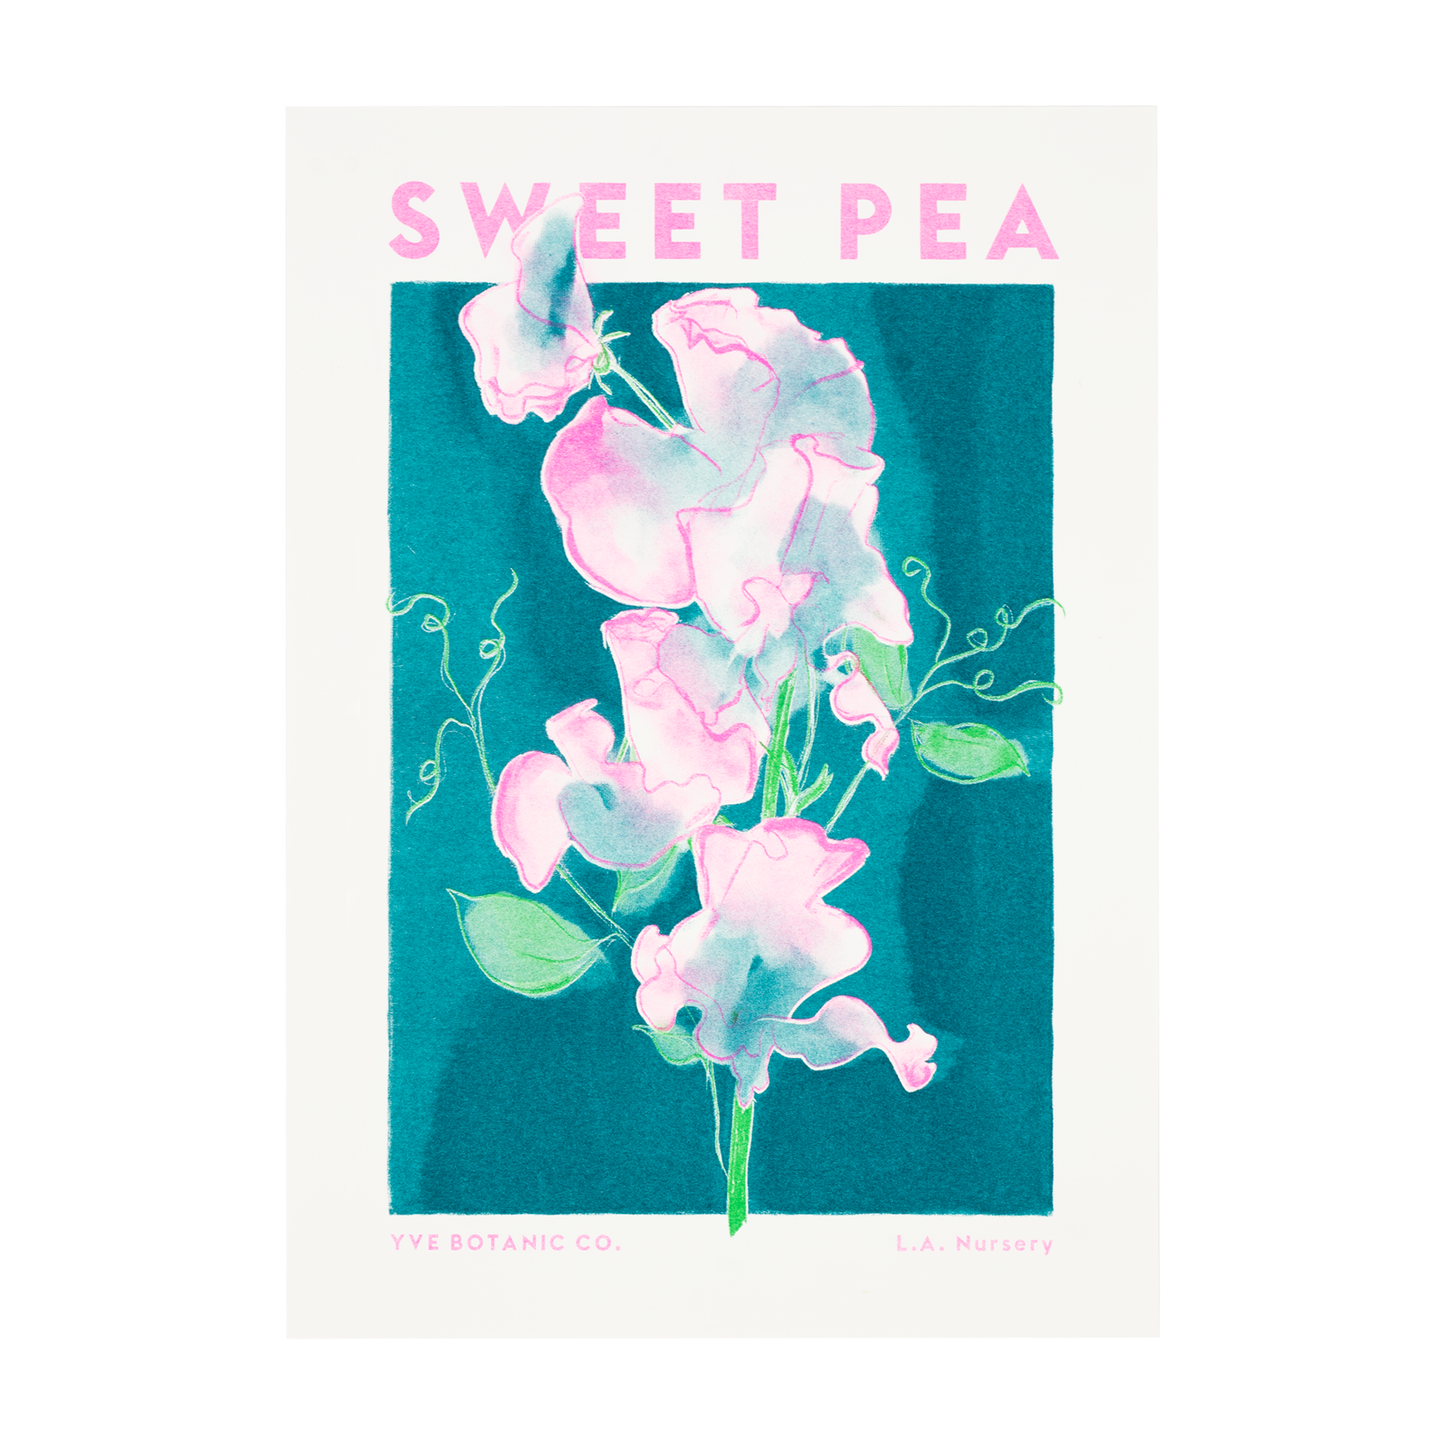 A risograph print featuring an illustration of a sweet pea flower. White background.